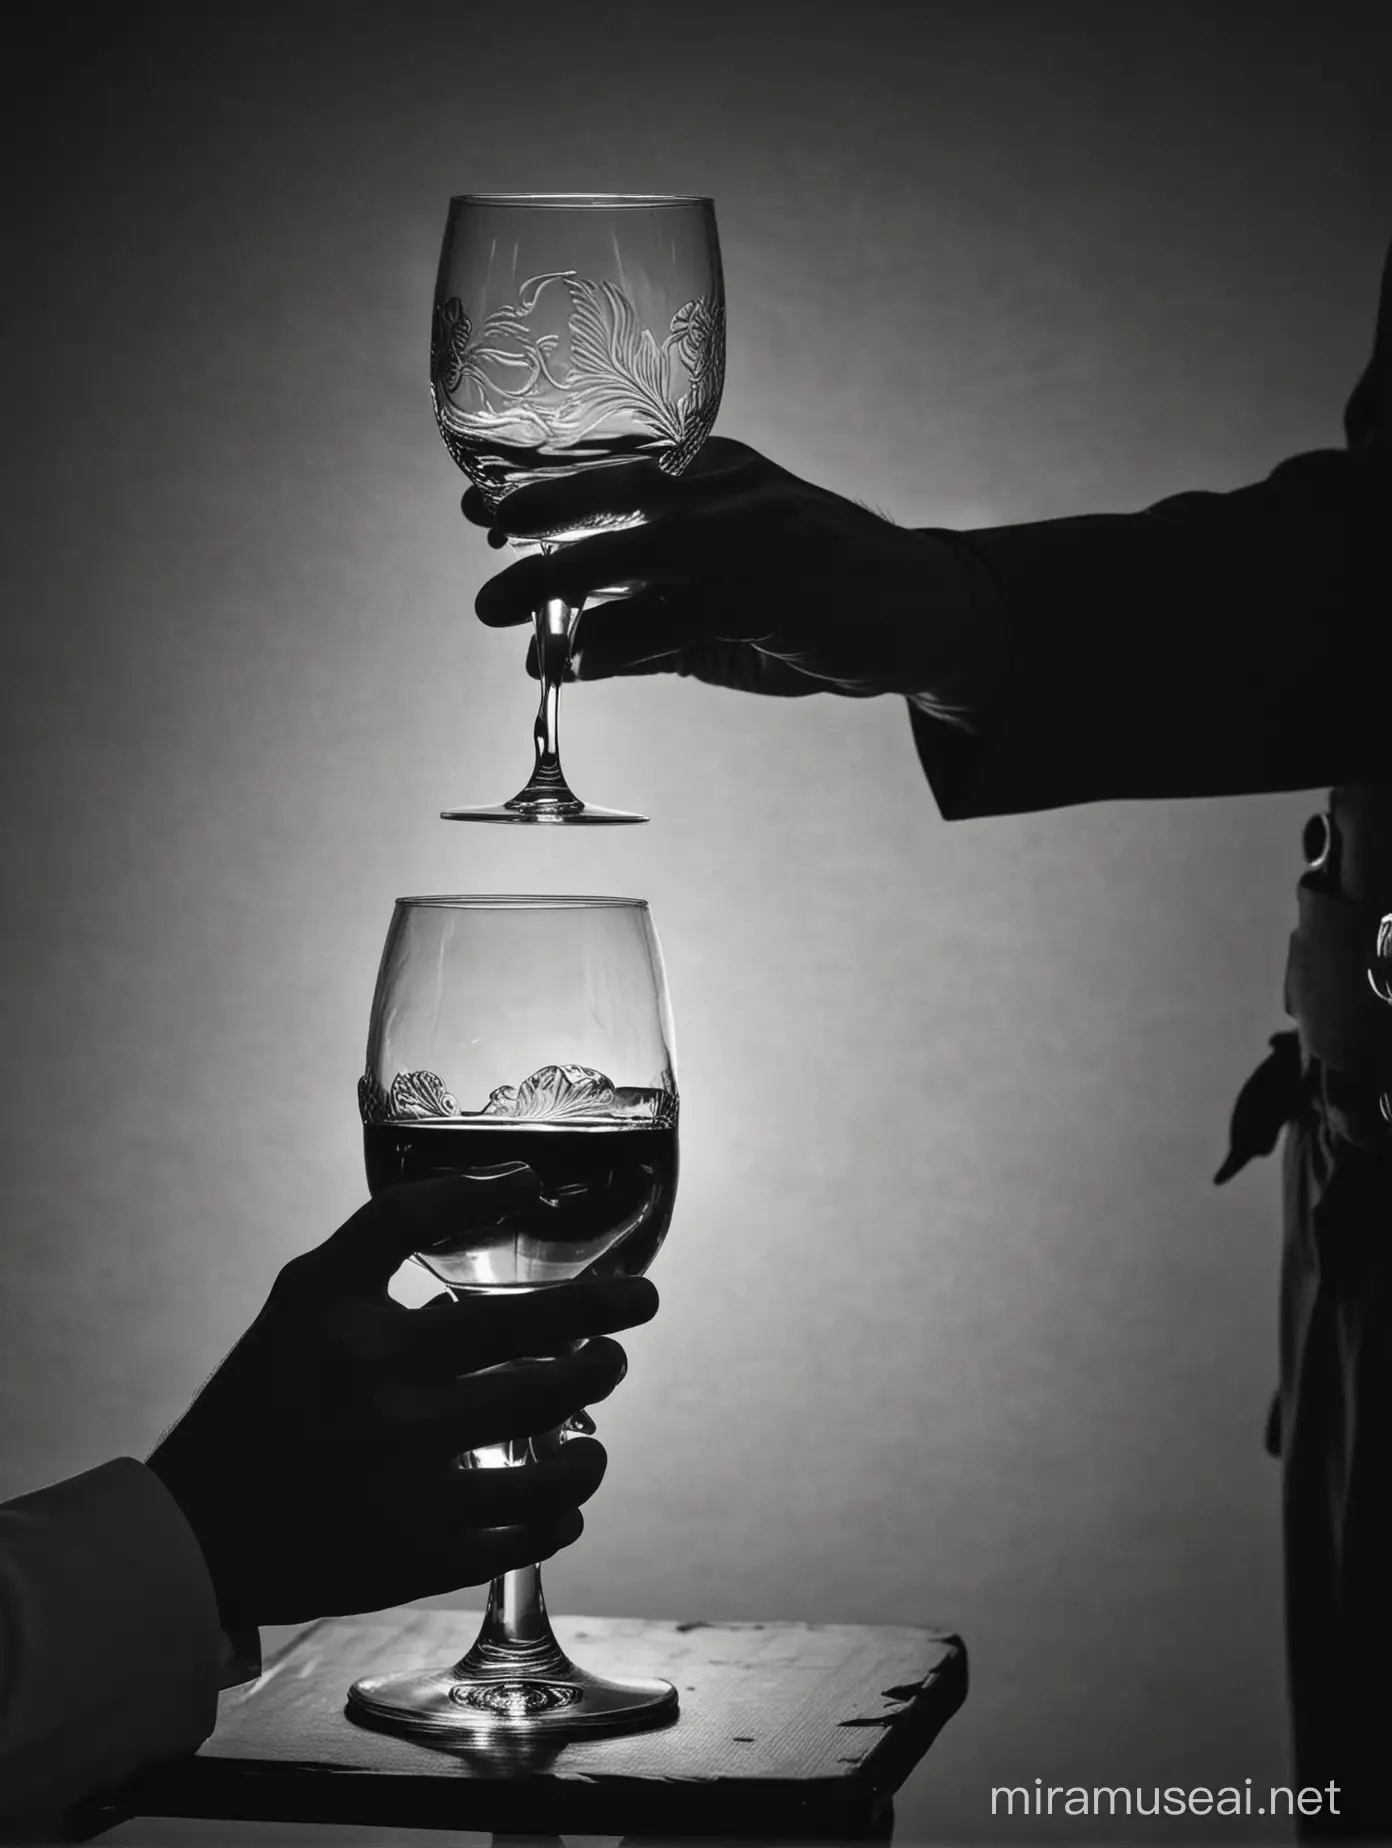 jose rizal's hand holding a glass of scotch, delivering a toast, and then on the silhouette of the glass of scotch were both nation of spain and philippines.